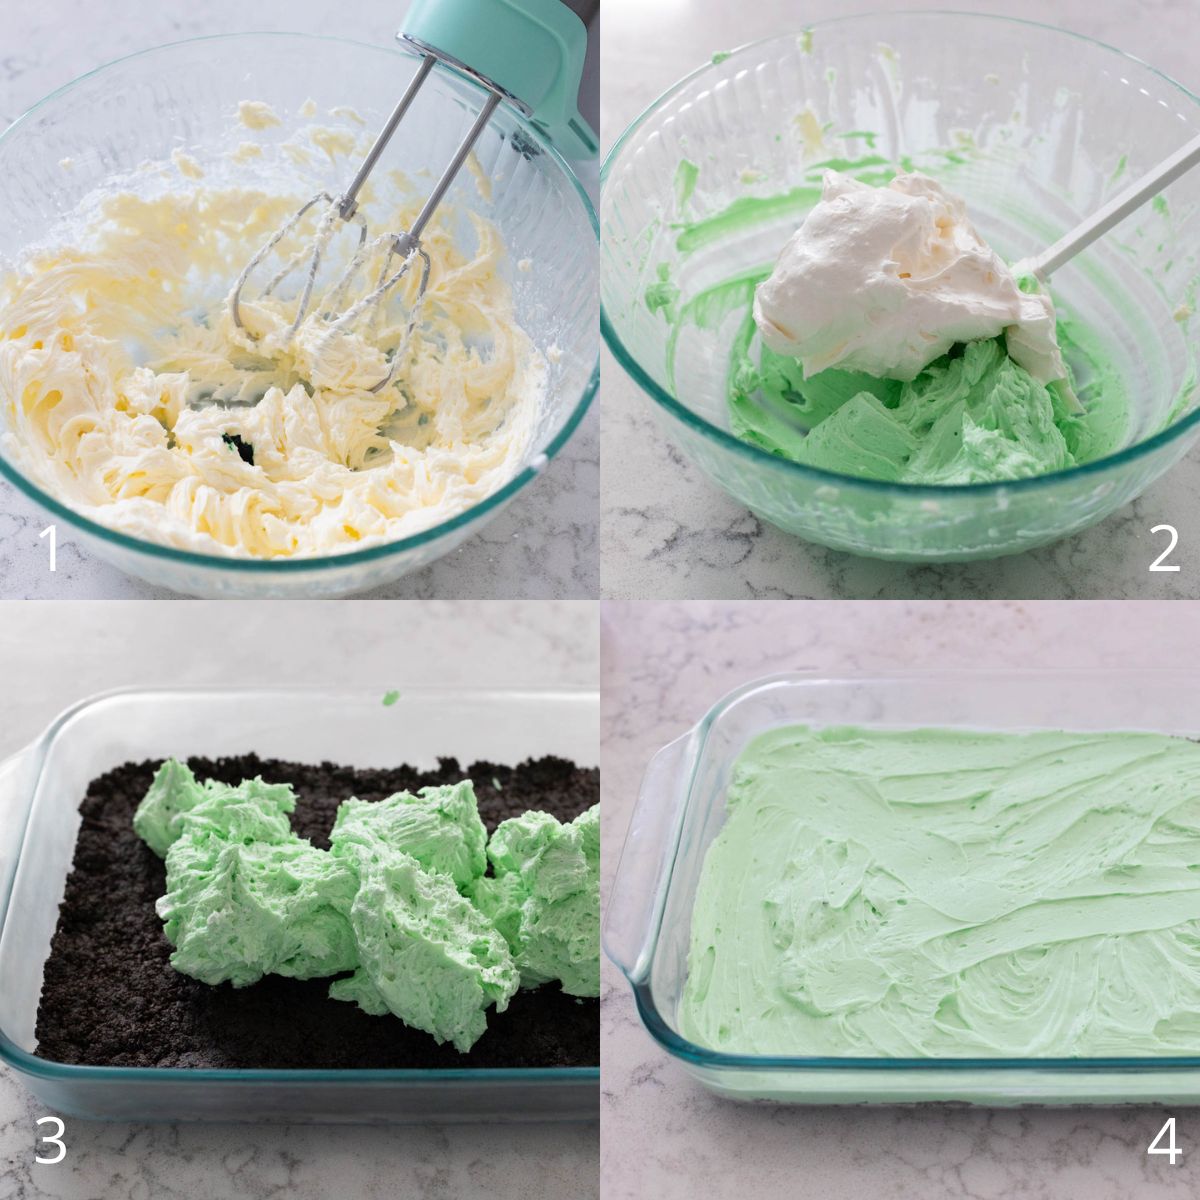 The step by step photos show how to beat the cream cheese and turn it green for the shamrock shake layer.